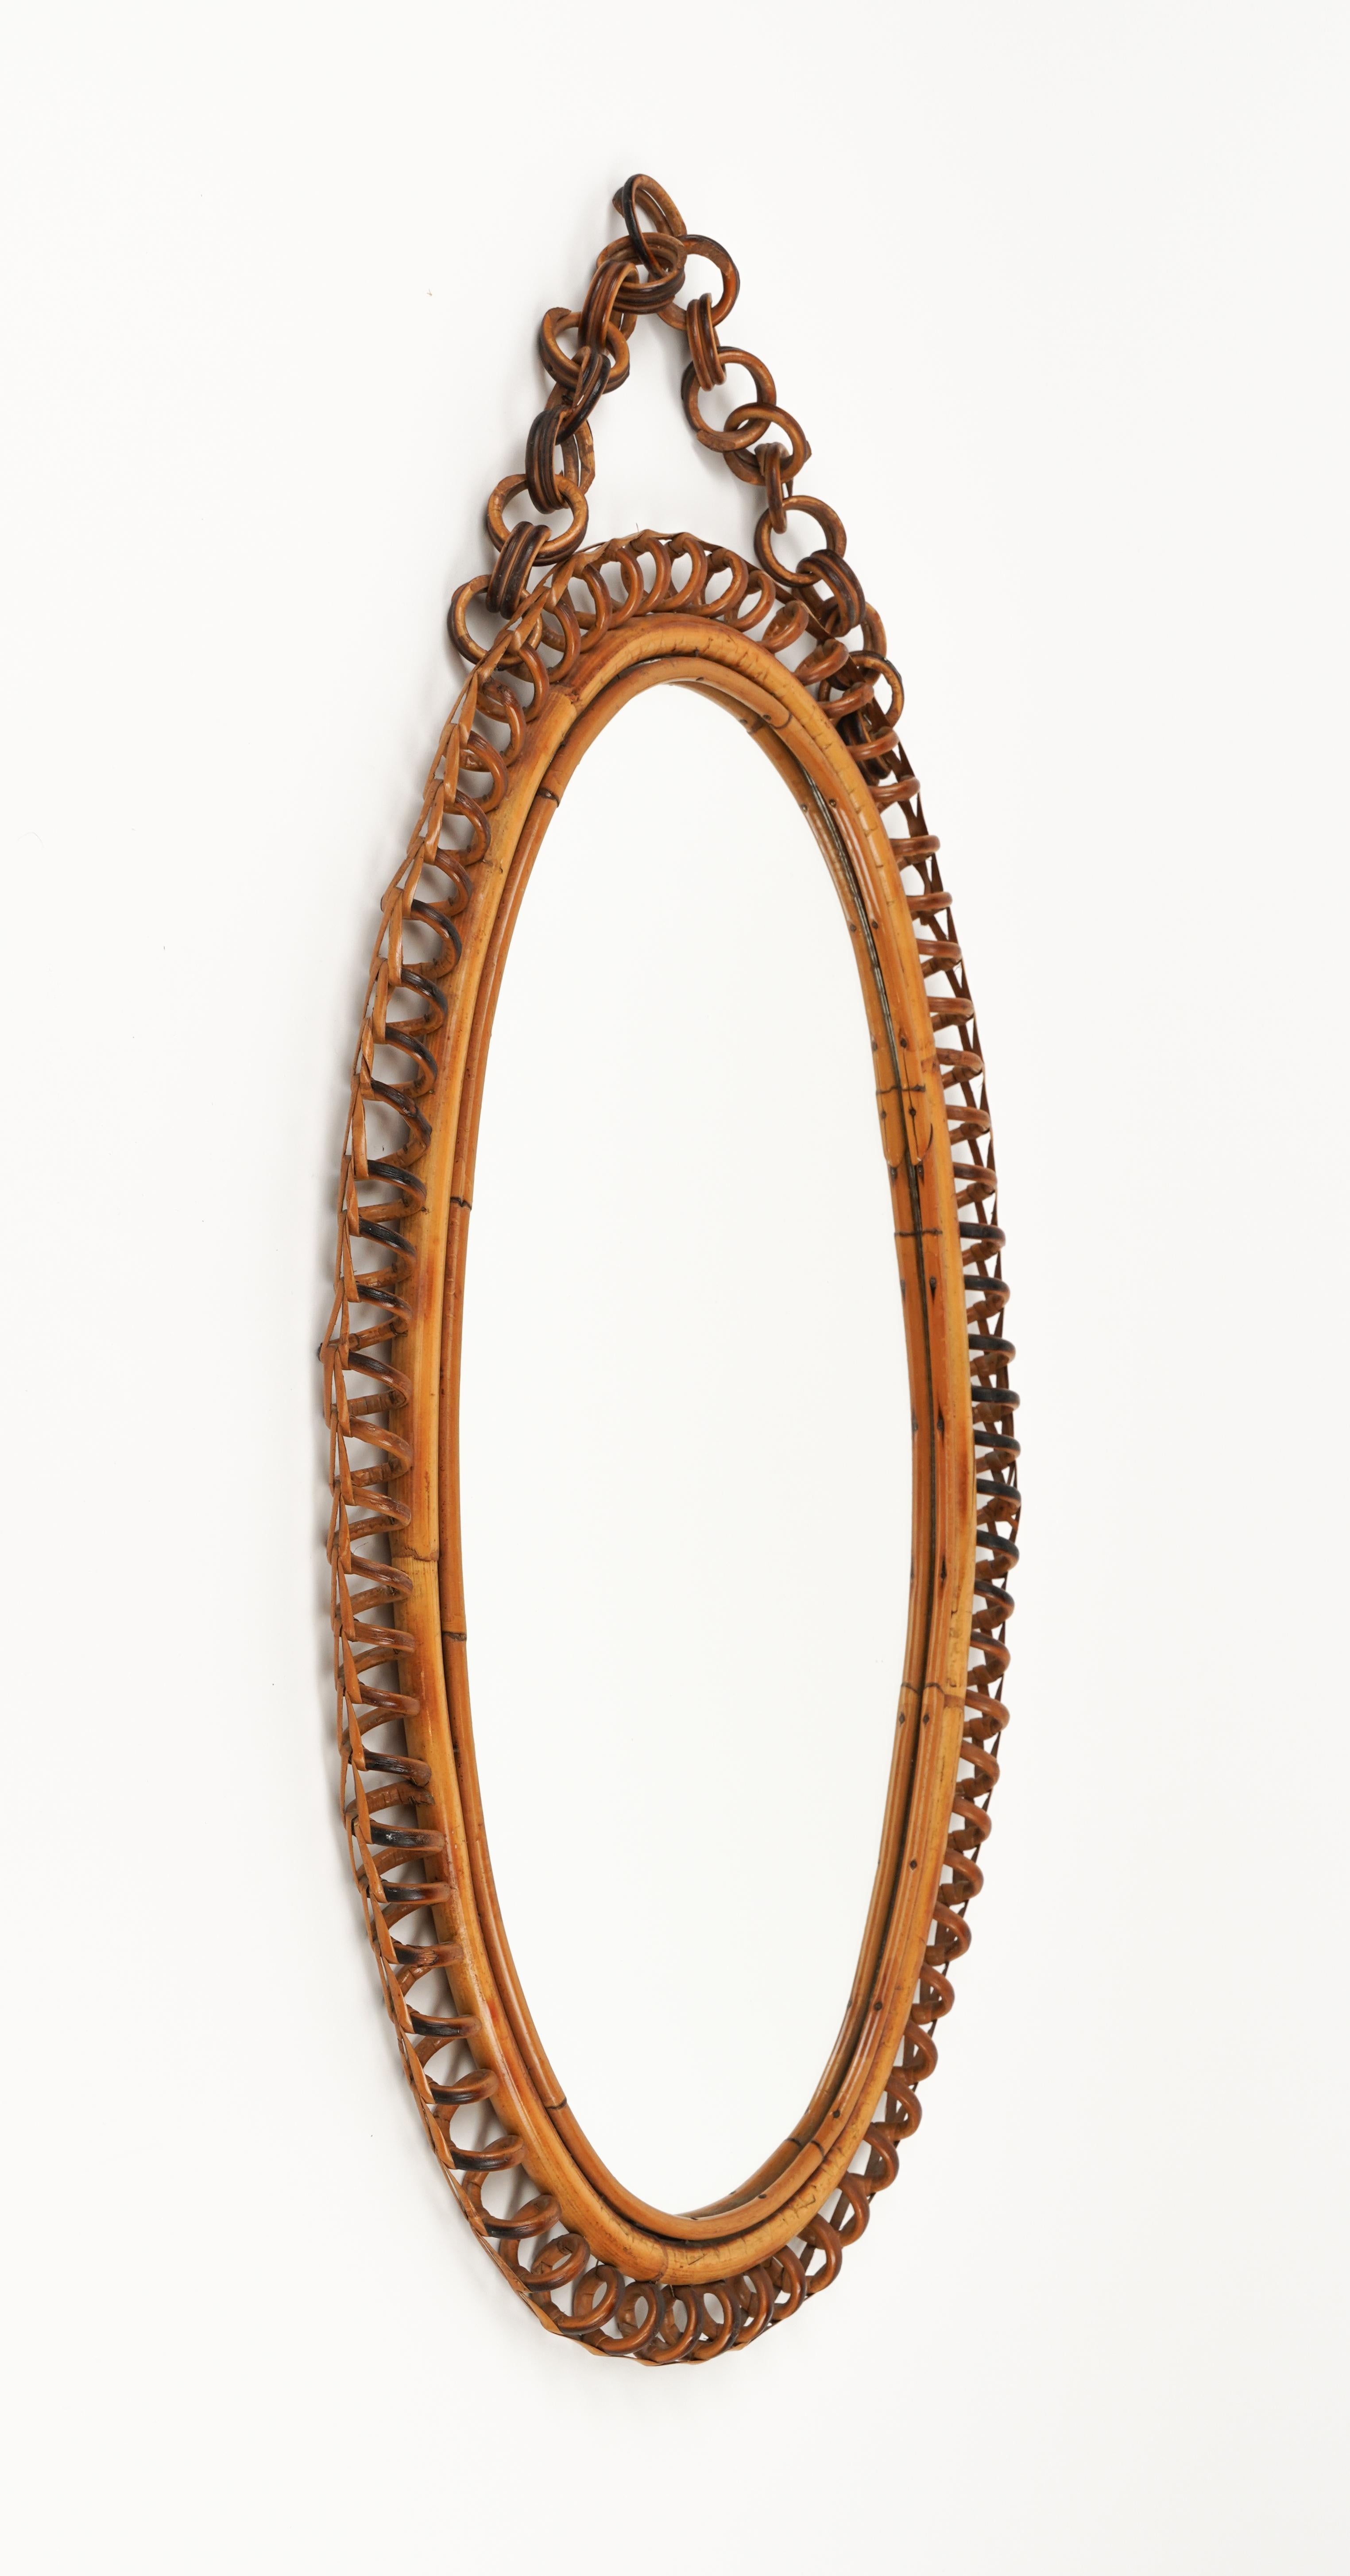 Midcentury beautiful oval wall mirror with chain in bamboo and rattan in the style of Italian design Franco Albini.  

Made in Italy in the 1960s.  

A highly decorative mirror.  

Dimensions without chain: 
Height 68 cm. 
Width 40cm. 
Depth 3cm.